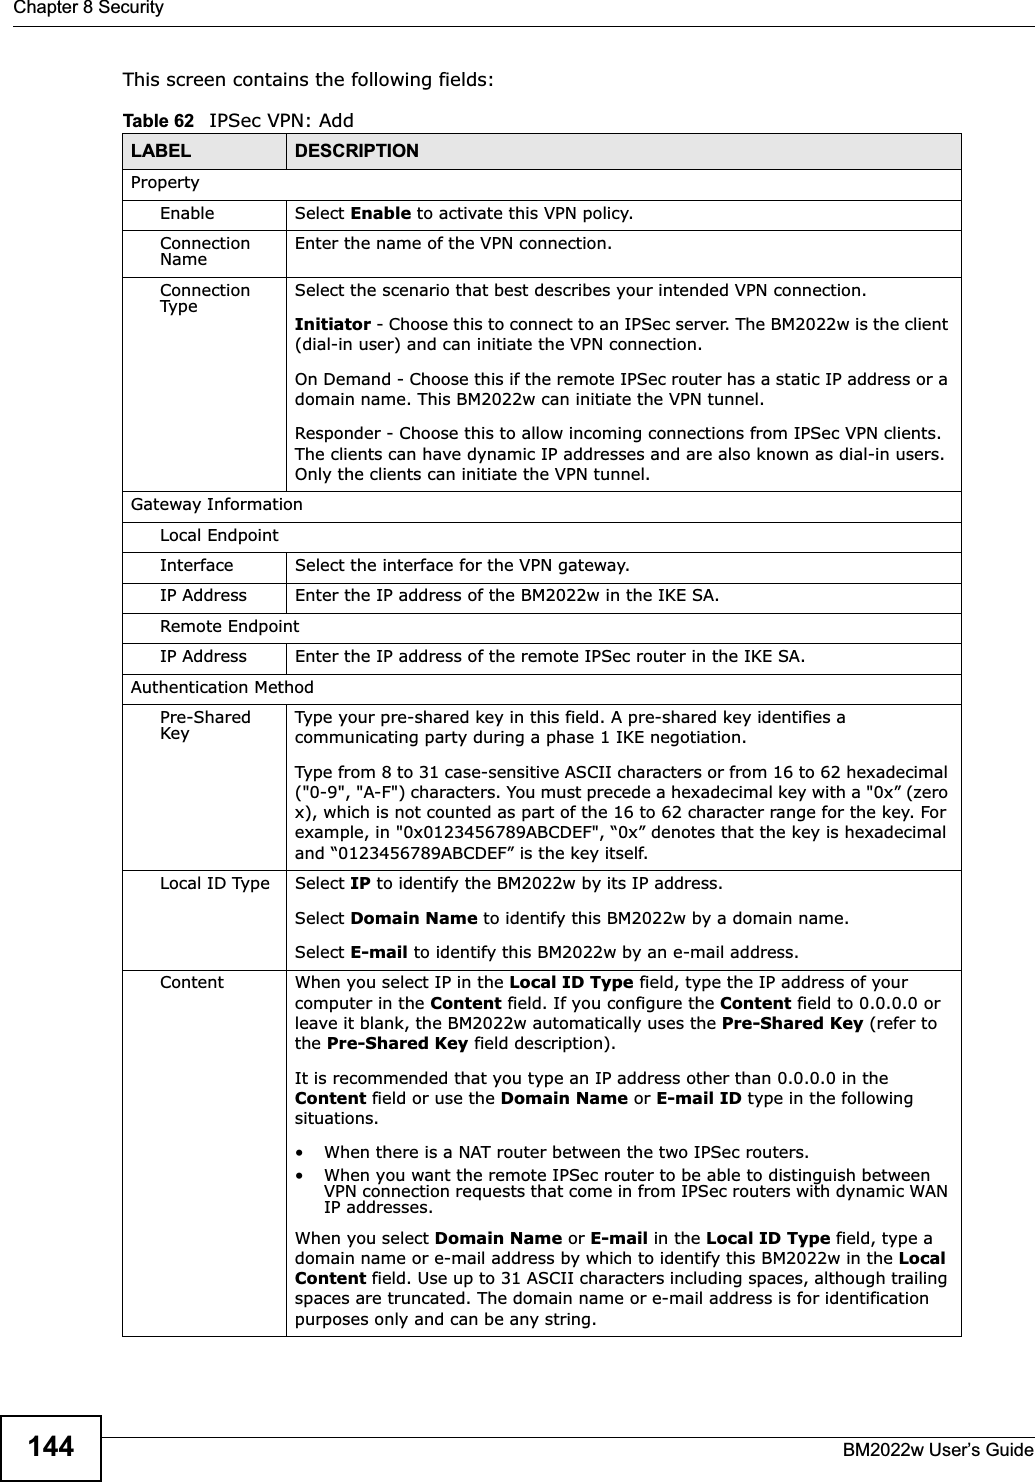 Chapter 8 SecurityBM2022w User’s Guide144This screen contains the following fields:Table 62   IPSec VPN: AddLABEL DESCRIPTIONPropertyEnable Select Enable to activate this VPN policy.Connection Name Enter the name of the VPN connection.Connection Type Select the scenario that best describes your intended VPN connection. Initiator - Choose this to connect to an IPSec server. The BM2022w is the client (dial-in user) and can initiate the VPN connection.  On Demand - Choose this if the remote IPSec router has a static IP address or a domain name. This BM2022w can initiate the VPN tunnel.Responder - Choose this to allow incoming connections from IPSec VPN clients. The clients can have dynamic IP addresses and are also known as dial-in users. Only the clients can initiate the VPN tunnel.Gateway InformationLocal EndpointInterface Select the interface for the VPN gateway.IP Address Enter the IP address of the BM2022w in the IKE SA.Remote EndpointIP Address Enter the IP address of the remote IPSec router in the IKE SA.Authentication MethodPre-Shared Key Type your pre-shared key in this field. A pre-shared key identifies a communicating party during a phase 1 IKE negotiation. Type from 8 to 31 case-sensitive ASCII characters or from 16 to 62 hexadecimal (&quot;0-9&quot;, &quot;A-F&quot;) characters. You must precede a hexadecimal key with a &quot;0x” (zero x), which is not counted as part of the 16 to 62 character range for the key. For example, in &quot;0x0123456789ABCDEF&quot;, “0x” denotes that the key is hexadecimal and “0123456789ABCDEF” is the key itself.Local ID Type Select IP to identify the BM2022w by its IP address. Select Domain Name to identify this BM2022w by a domain name.Select E-mail to identify this BM2022w by an e-mail address.Content When you select IP in the Local ID Type field, type the IP address of your computer in the Content field. If you configure the Content field to 0.0.0.0 or leave it blank, the BM2022w automatically uses the Pre-Shared Key (refer to the Pre-Shared Key field description). It is recommended that you type an IP address other than 0.0.0.0 in the  Content field or use the Domain Name or E-mail ID type in the following situations.• When there is a NAT router between the two IPSec routers. • When you want the remote IPSec router to be able to distinguish between VPN connection requests that come in from IPSec routers with dynamic WAN IP addresses. When you select Domain Name or E-mail in the Local ID Type field, type a domain name or e-mail address by which to identify this BM2022w in the LocalContent field. Use up to 31 ASCII characters including spaces, although trailing spaces are truncated. The domain name or e-mail address is for identification purposes only and can be any string.